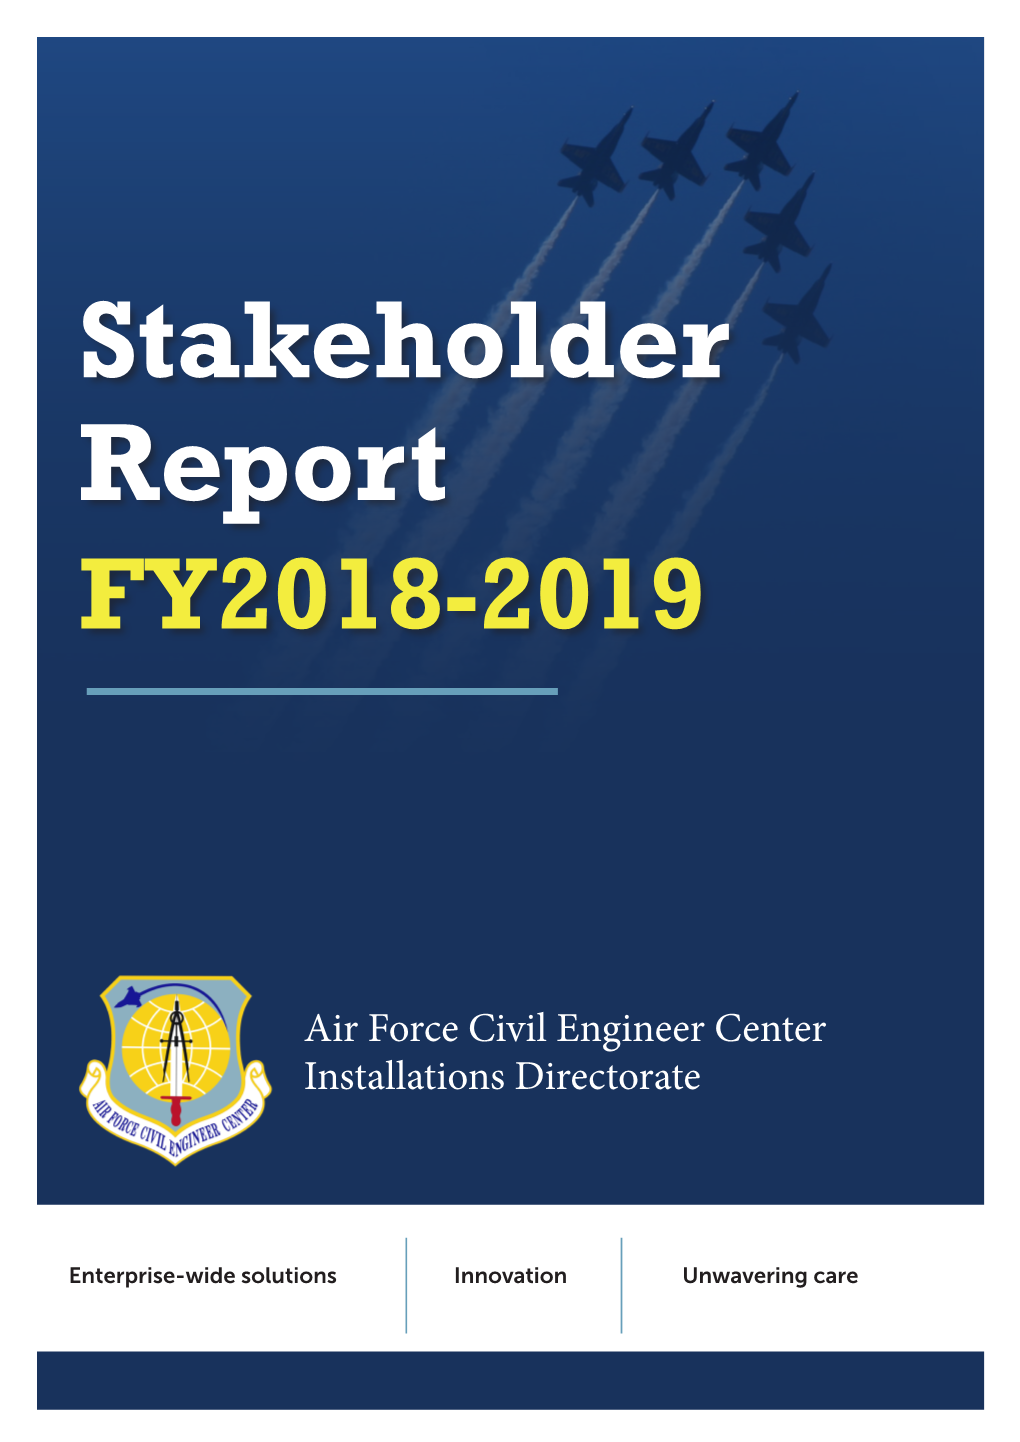 Stakeholder Report FY2018-2019